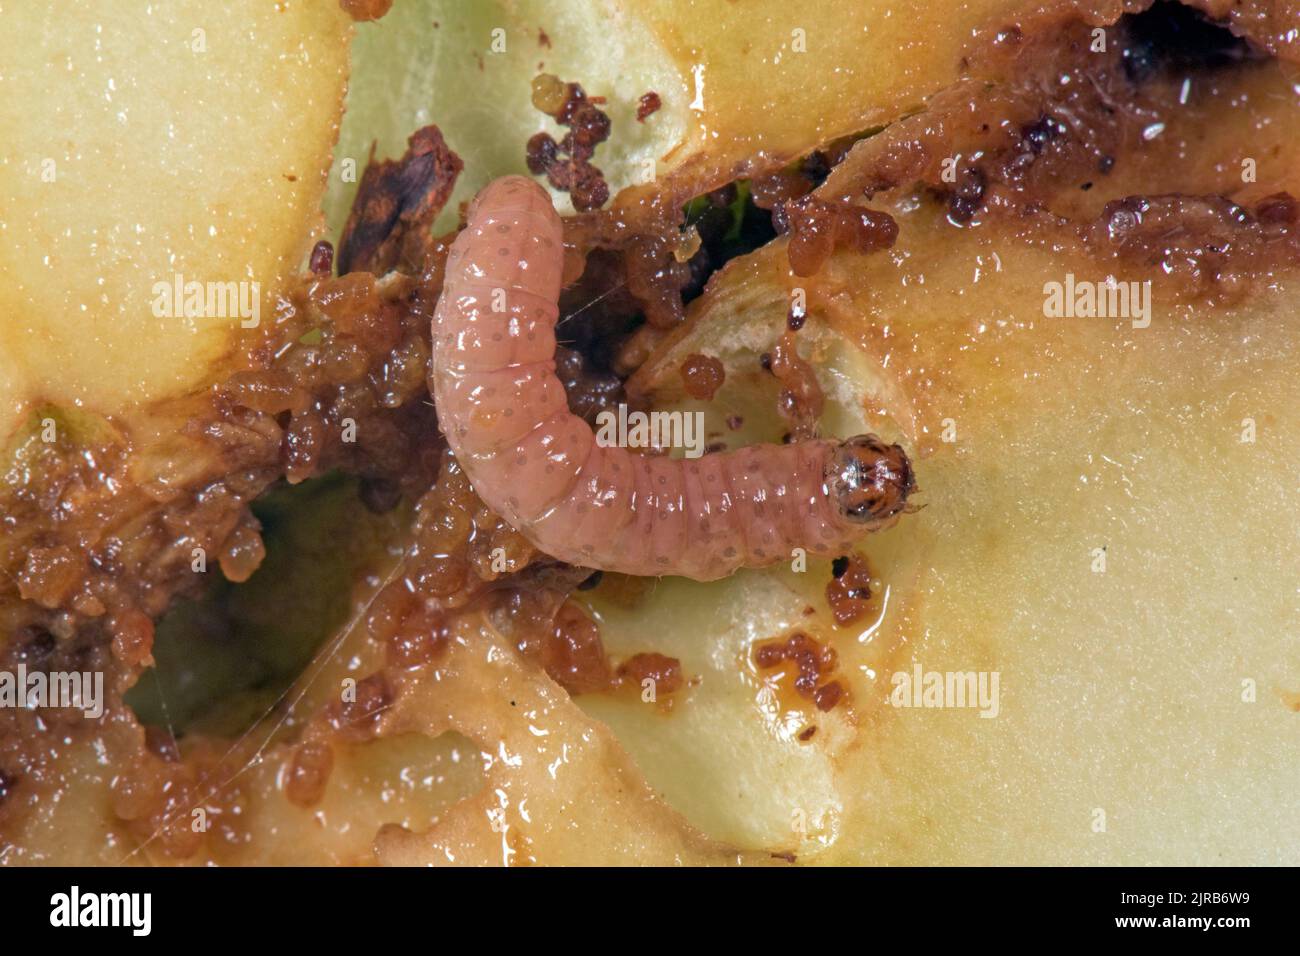 Codling moth (Cydia pomonella) caterpillar among is frass in a gallery in a damaged apple fruit section, Berkshire, August Stock Photo